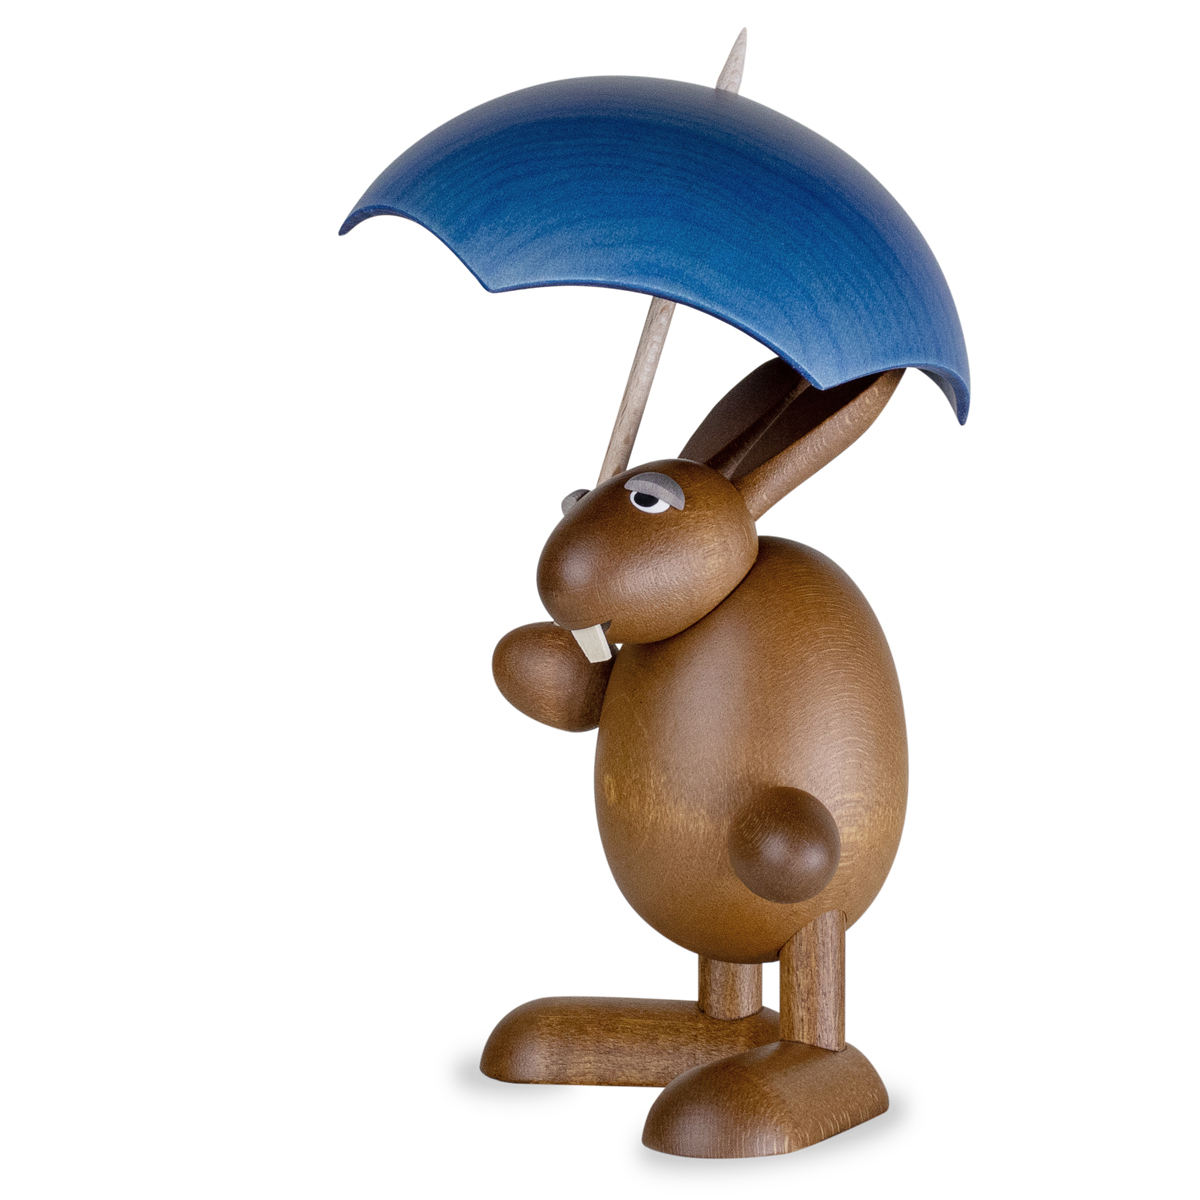 Easter Bunny holding an umbrella in blue